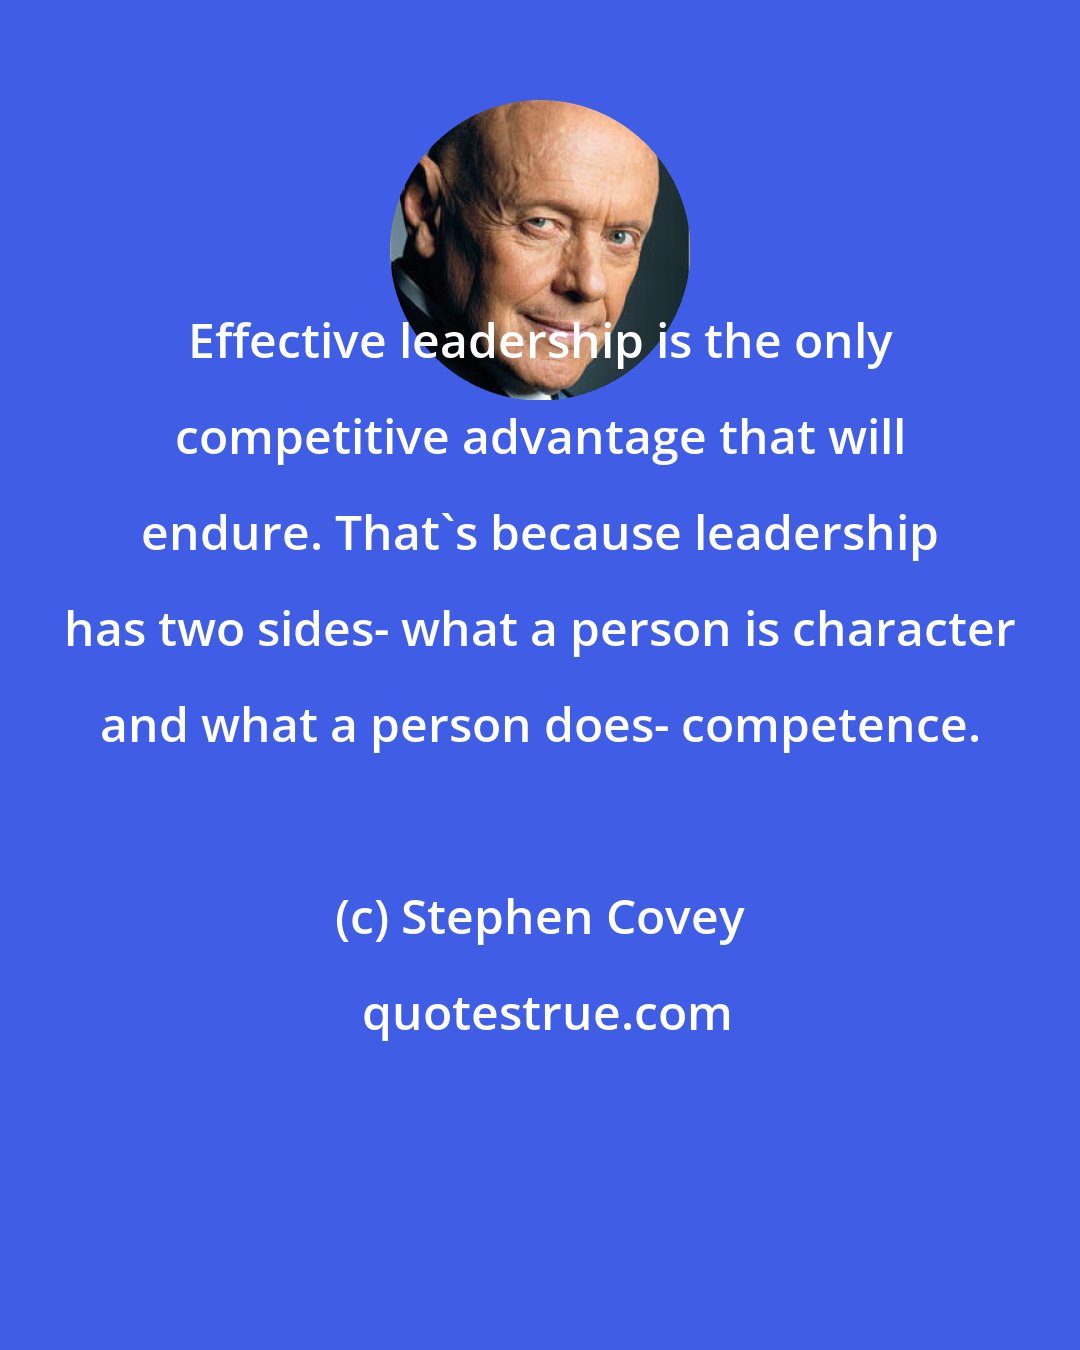 Stephen Covey: Effective leadership is the only competitive advantage that will endure. That's because leadership has two sides- what a person is character and what a person does- competence.